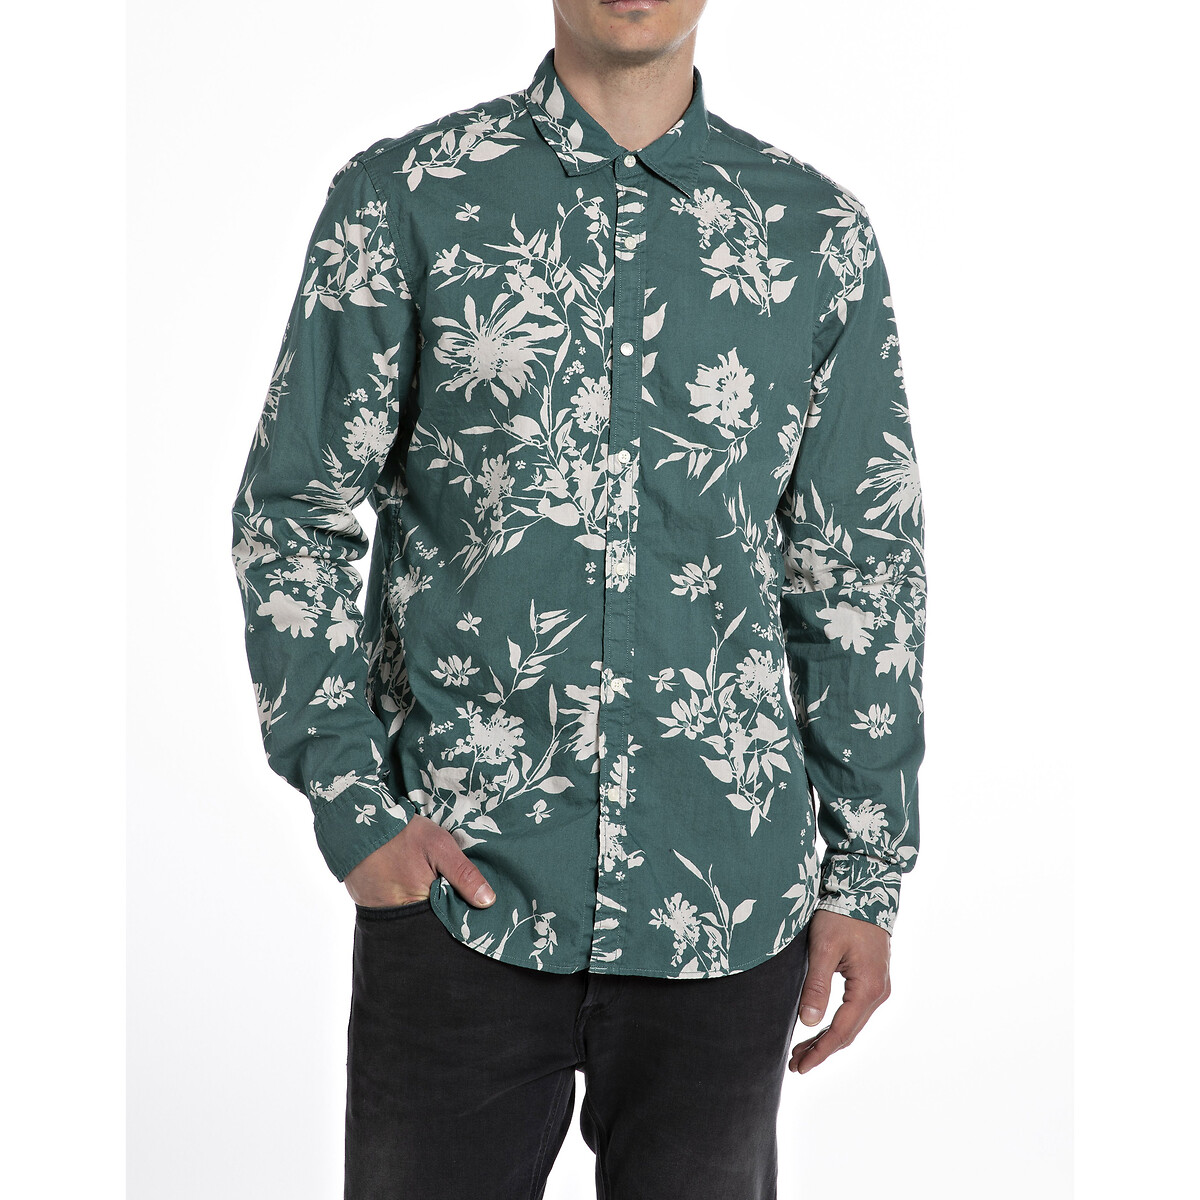 Floral/Leaf Print Shirt in Cotton and Regular Fit with Long Sleeves